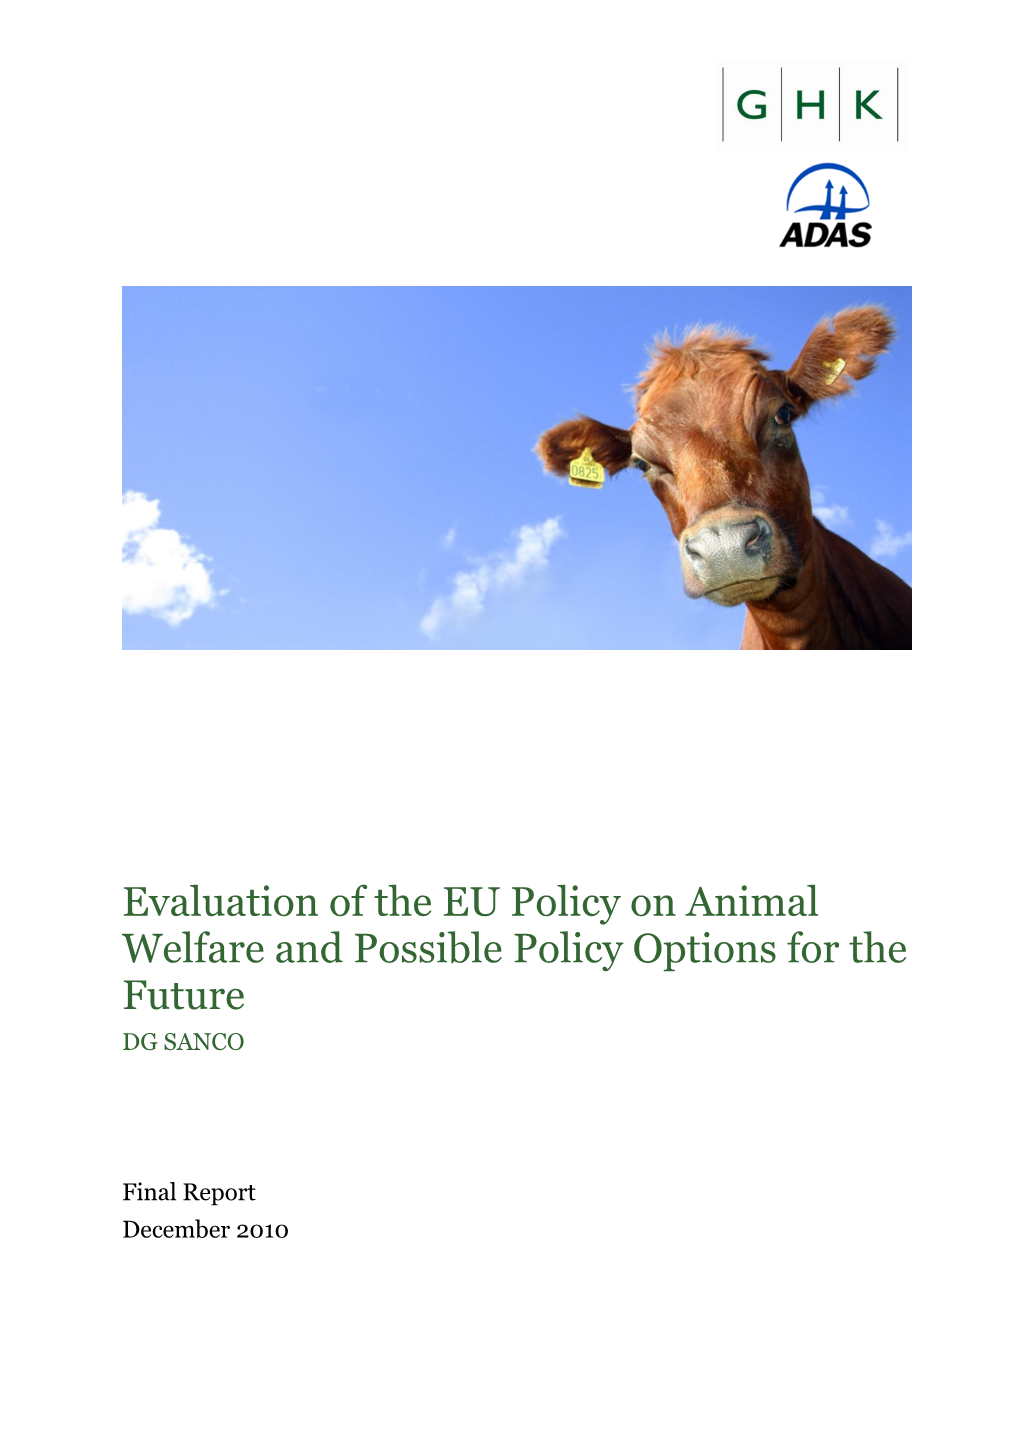 EU Policy on Animal Welfare and Possible Policy Options for the Future DG SANCO